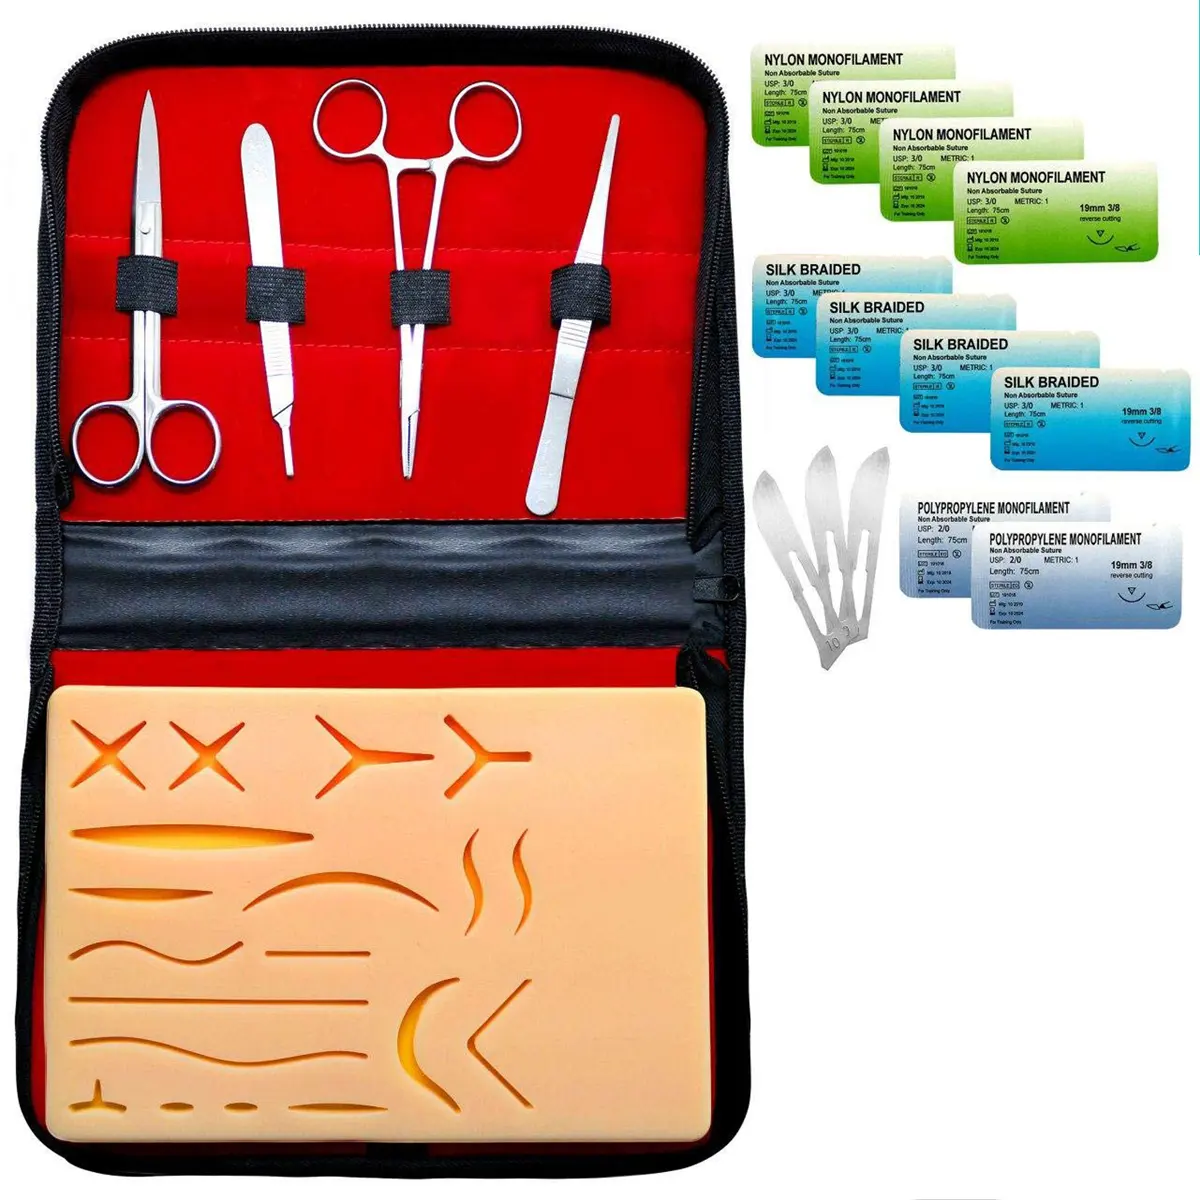 Suture Practice Kit for Medical Students Includes Complete Tool Kit Extra Large Silicone Pad with 19 Pre-Cut Wounds